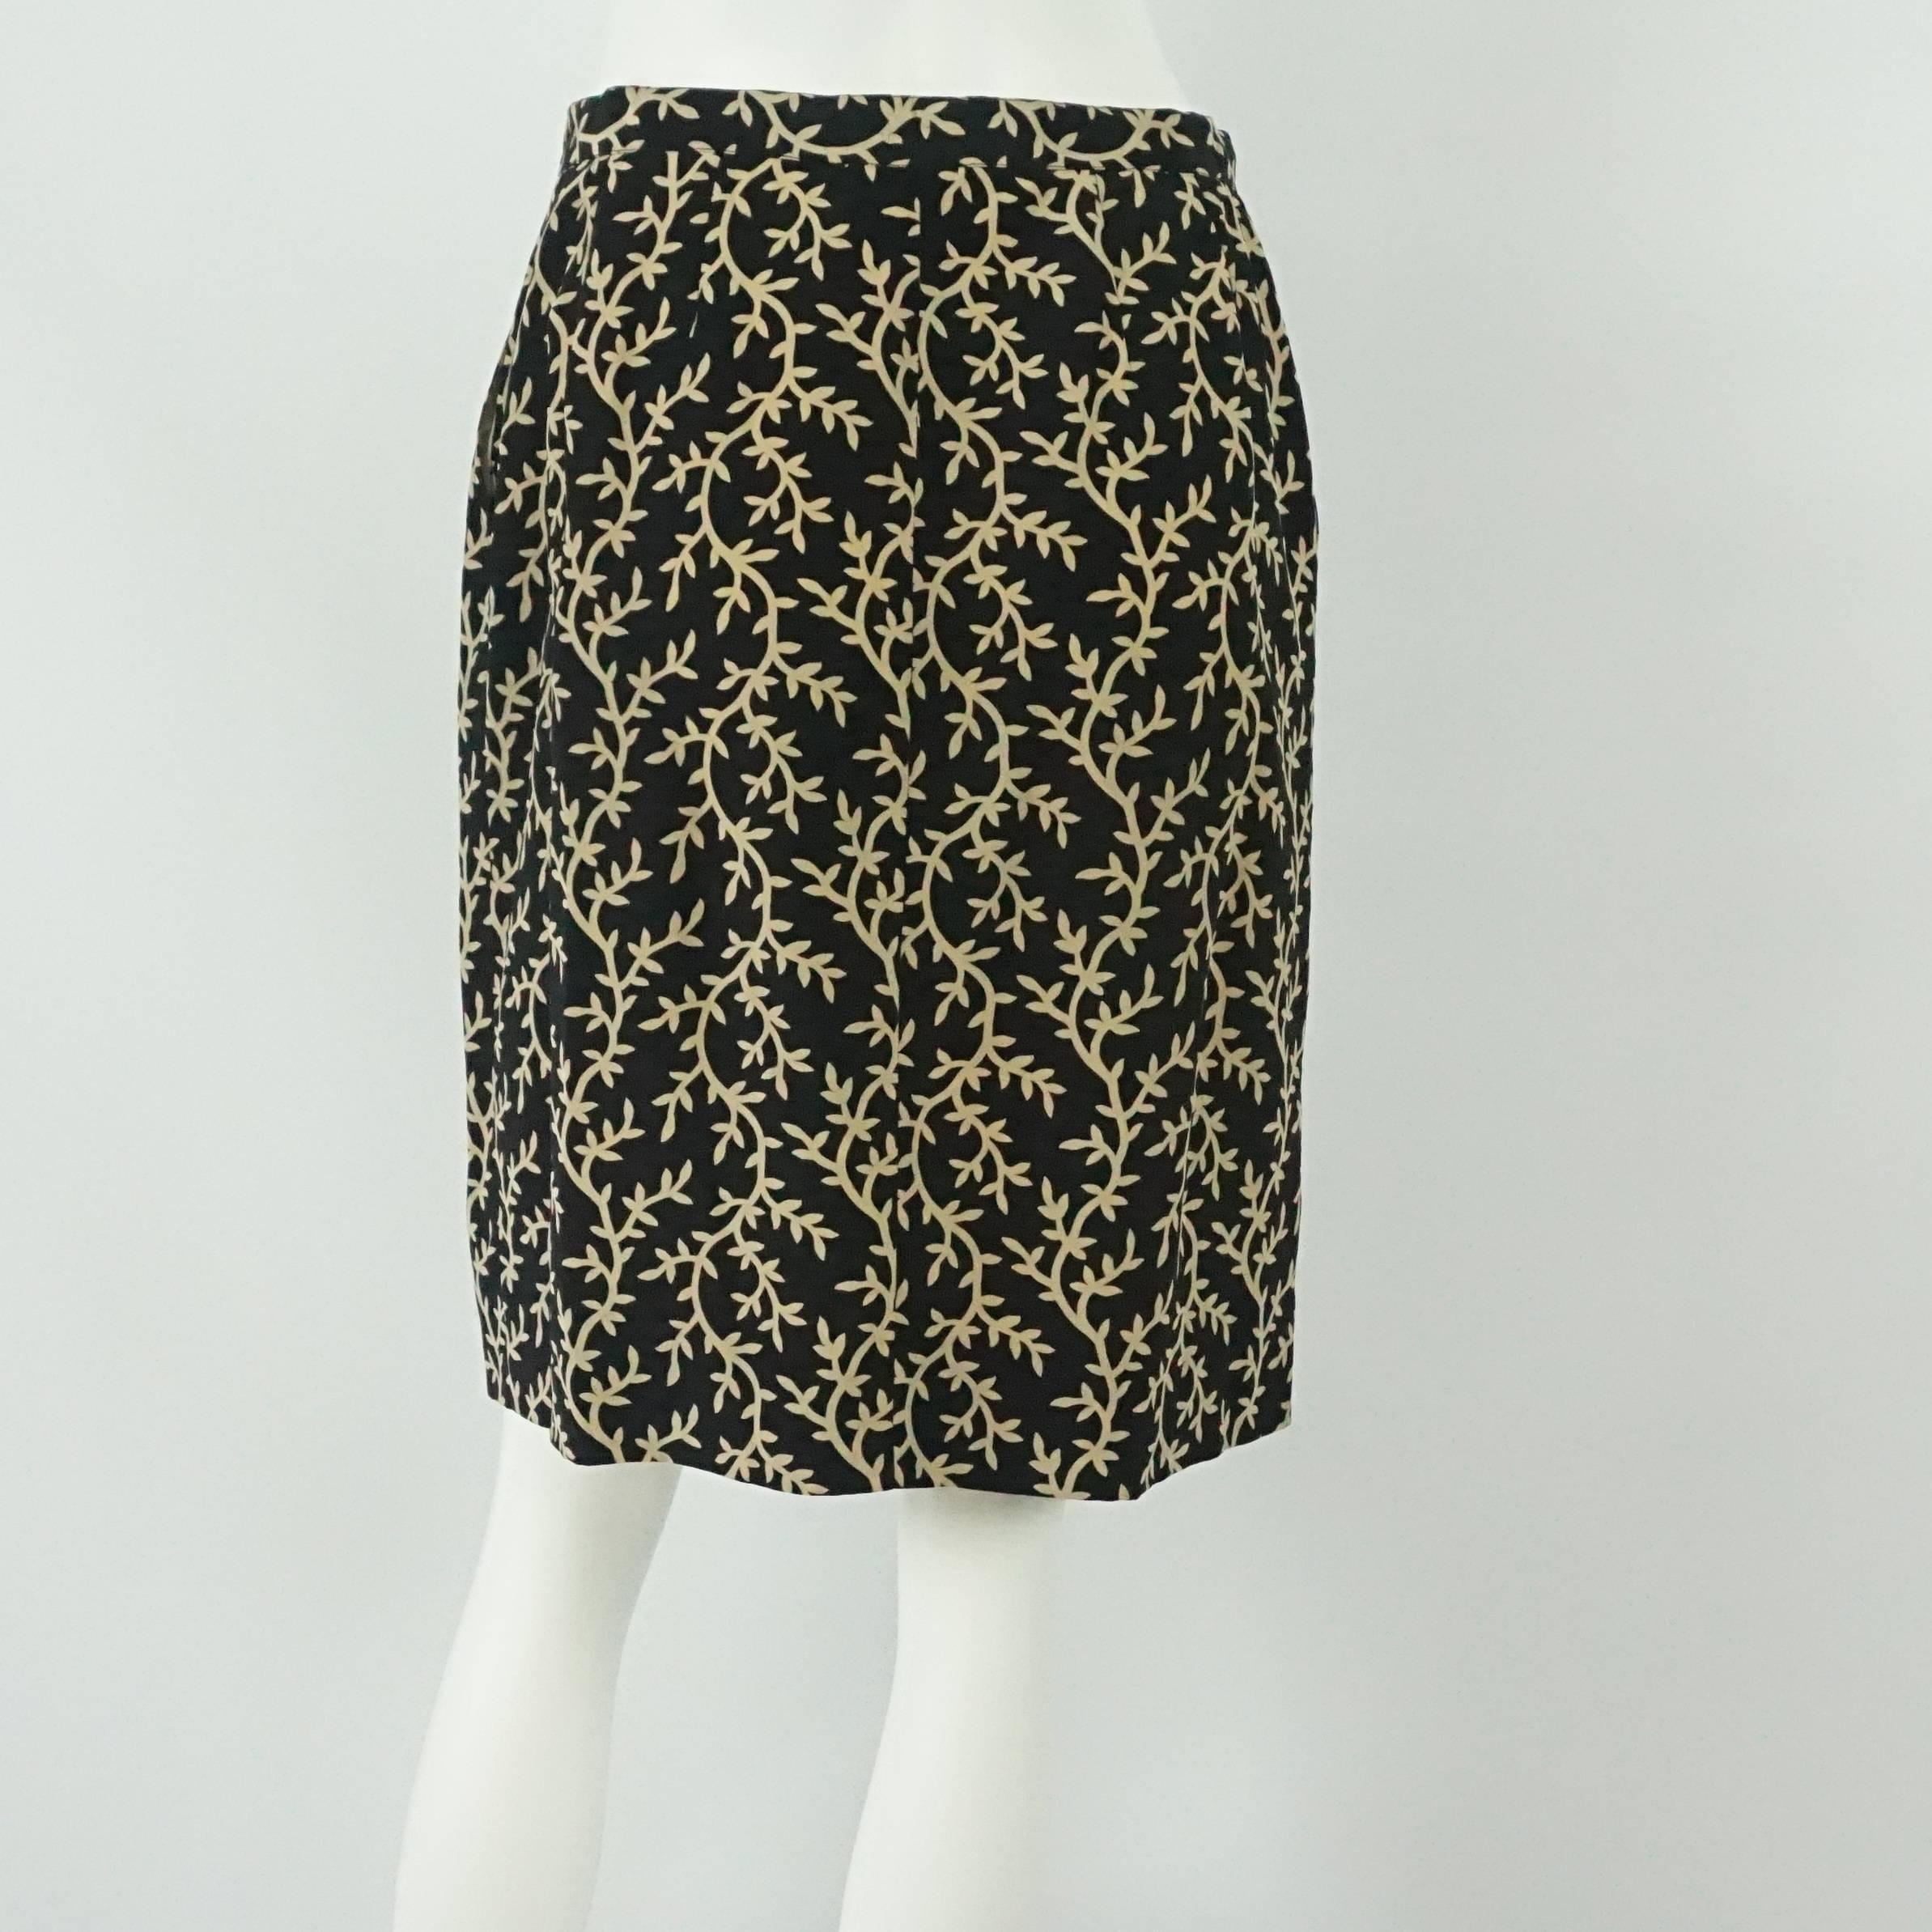 Chanel Black and Tan Skirt - M In Excellent Condition For Sale In West Palm Beach, FL